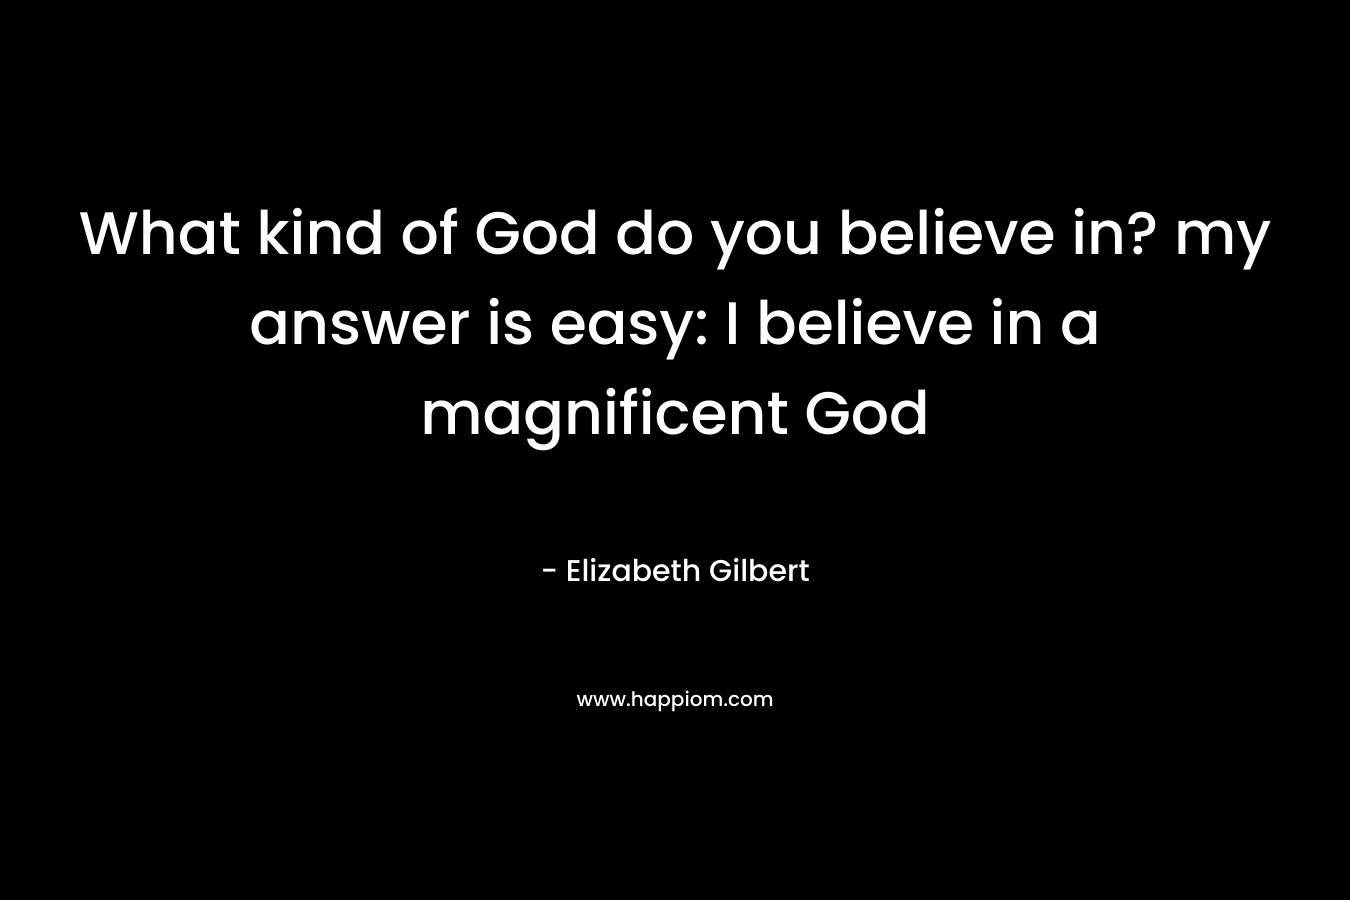 What kind of God do you believe in? my answer is easy: I believe in a magnificent God